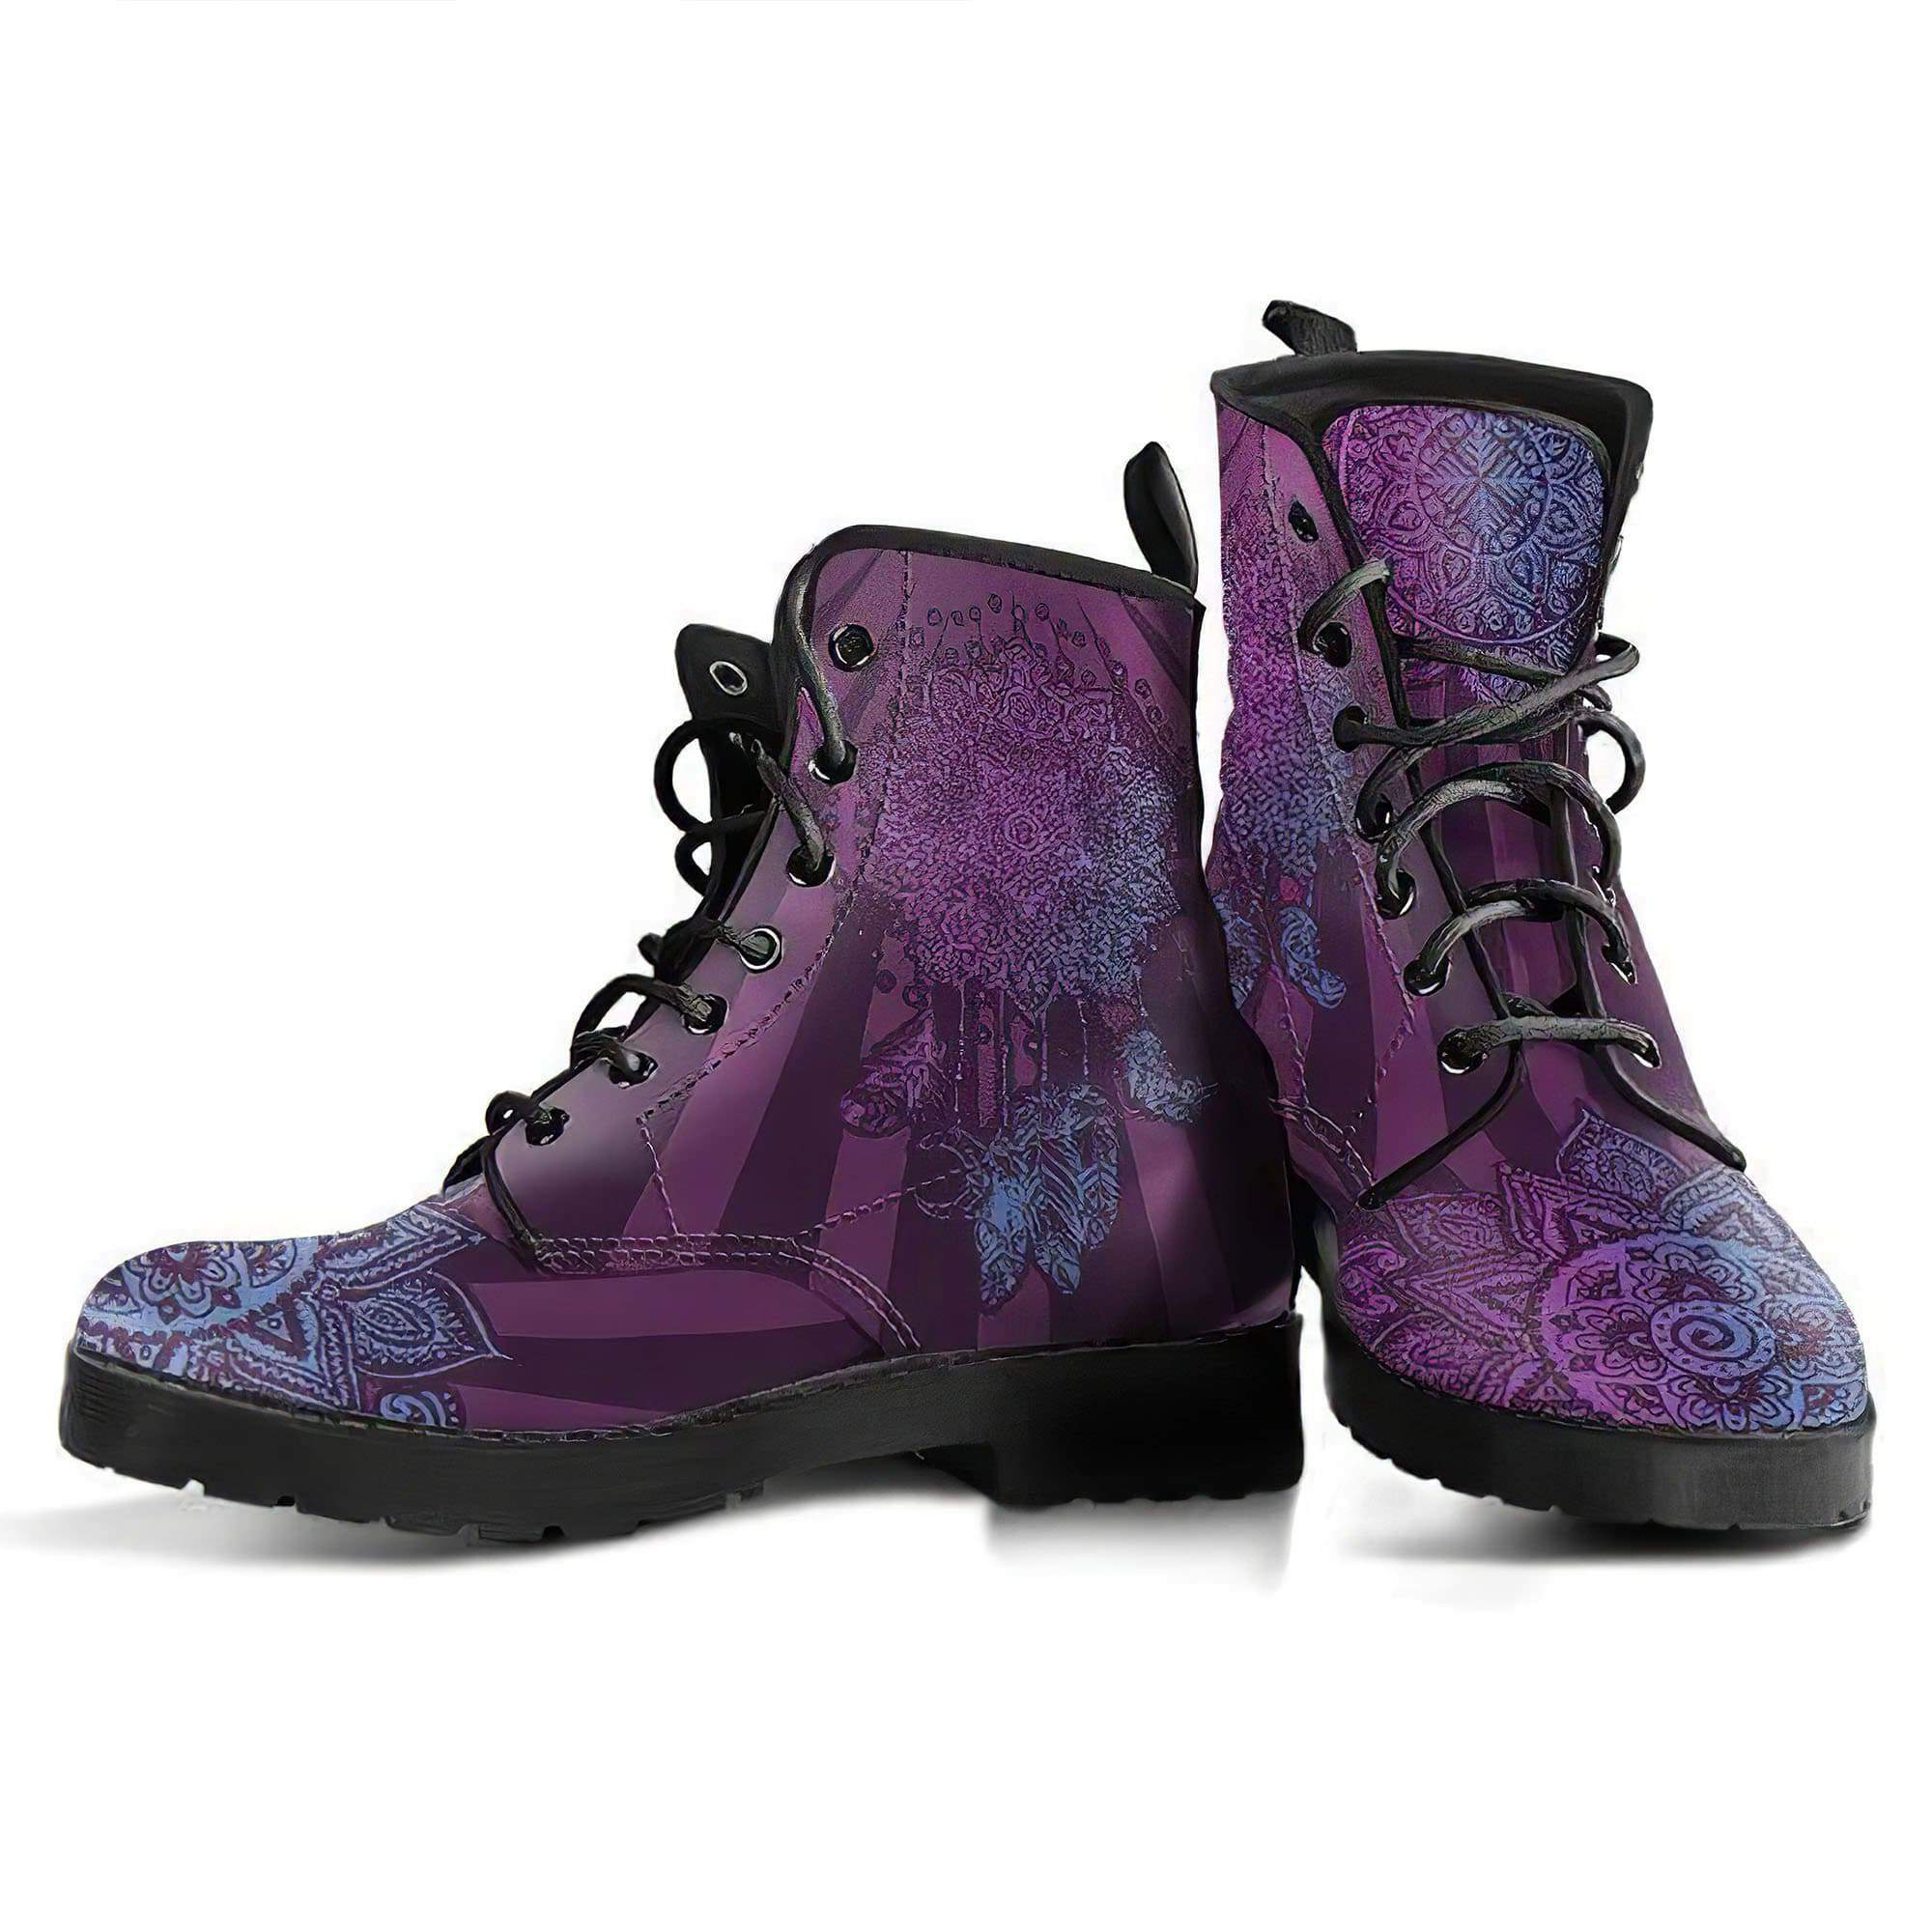 purple-dreamcatcher-handcrafted-boots-women-s-leather-boots-12051933855805.jpg